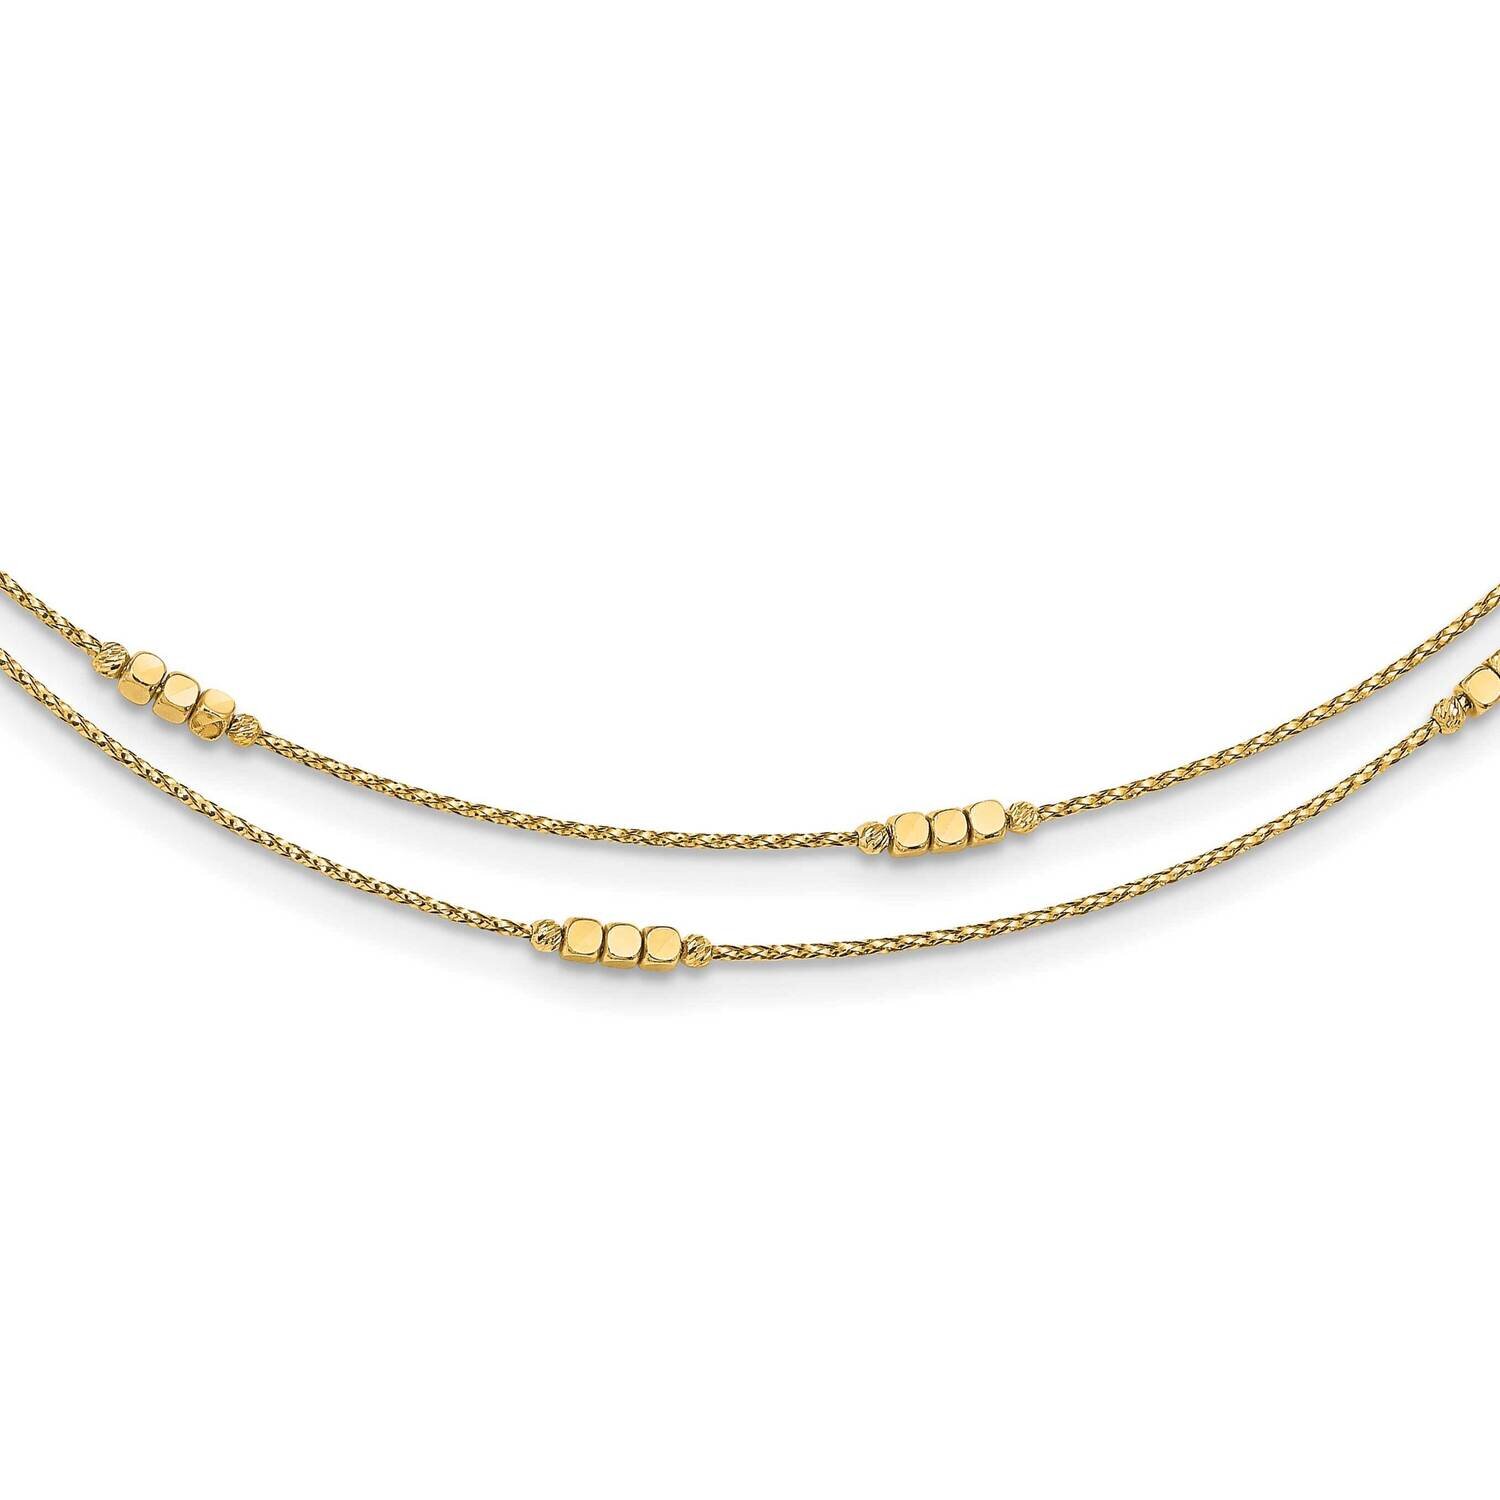 Diamond-Cut Beaded Double Strand with 1 Inch Extender Necklace 18 Inch 14k Gold Polished SF2852-17